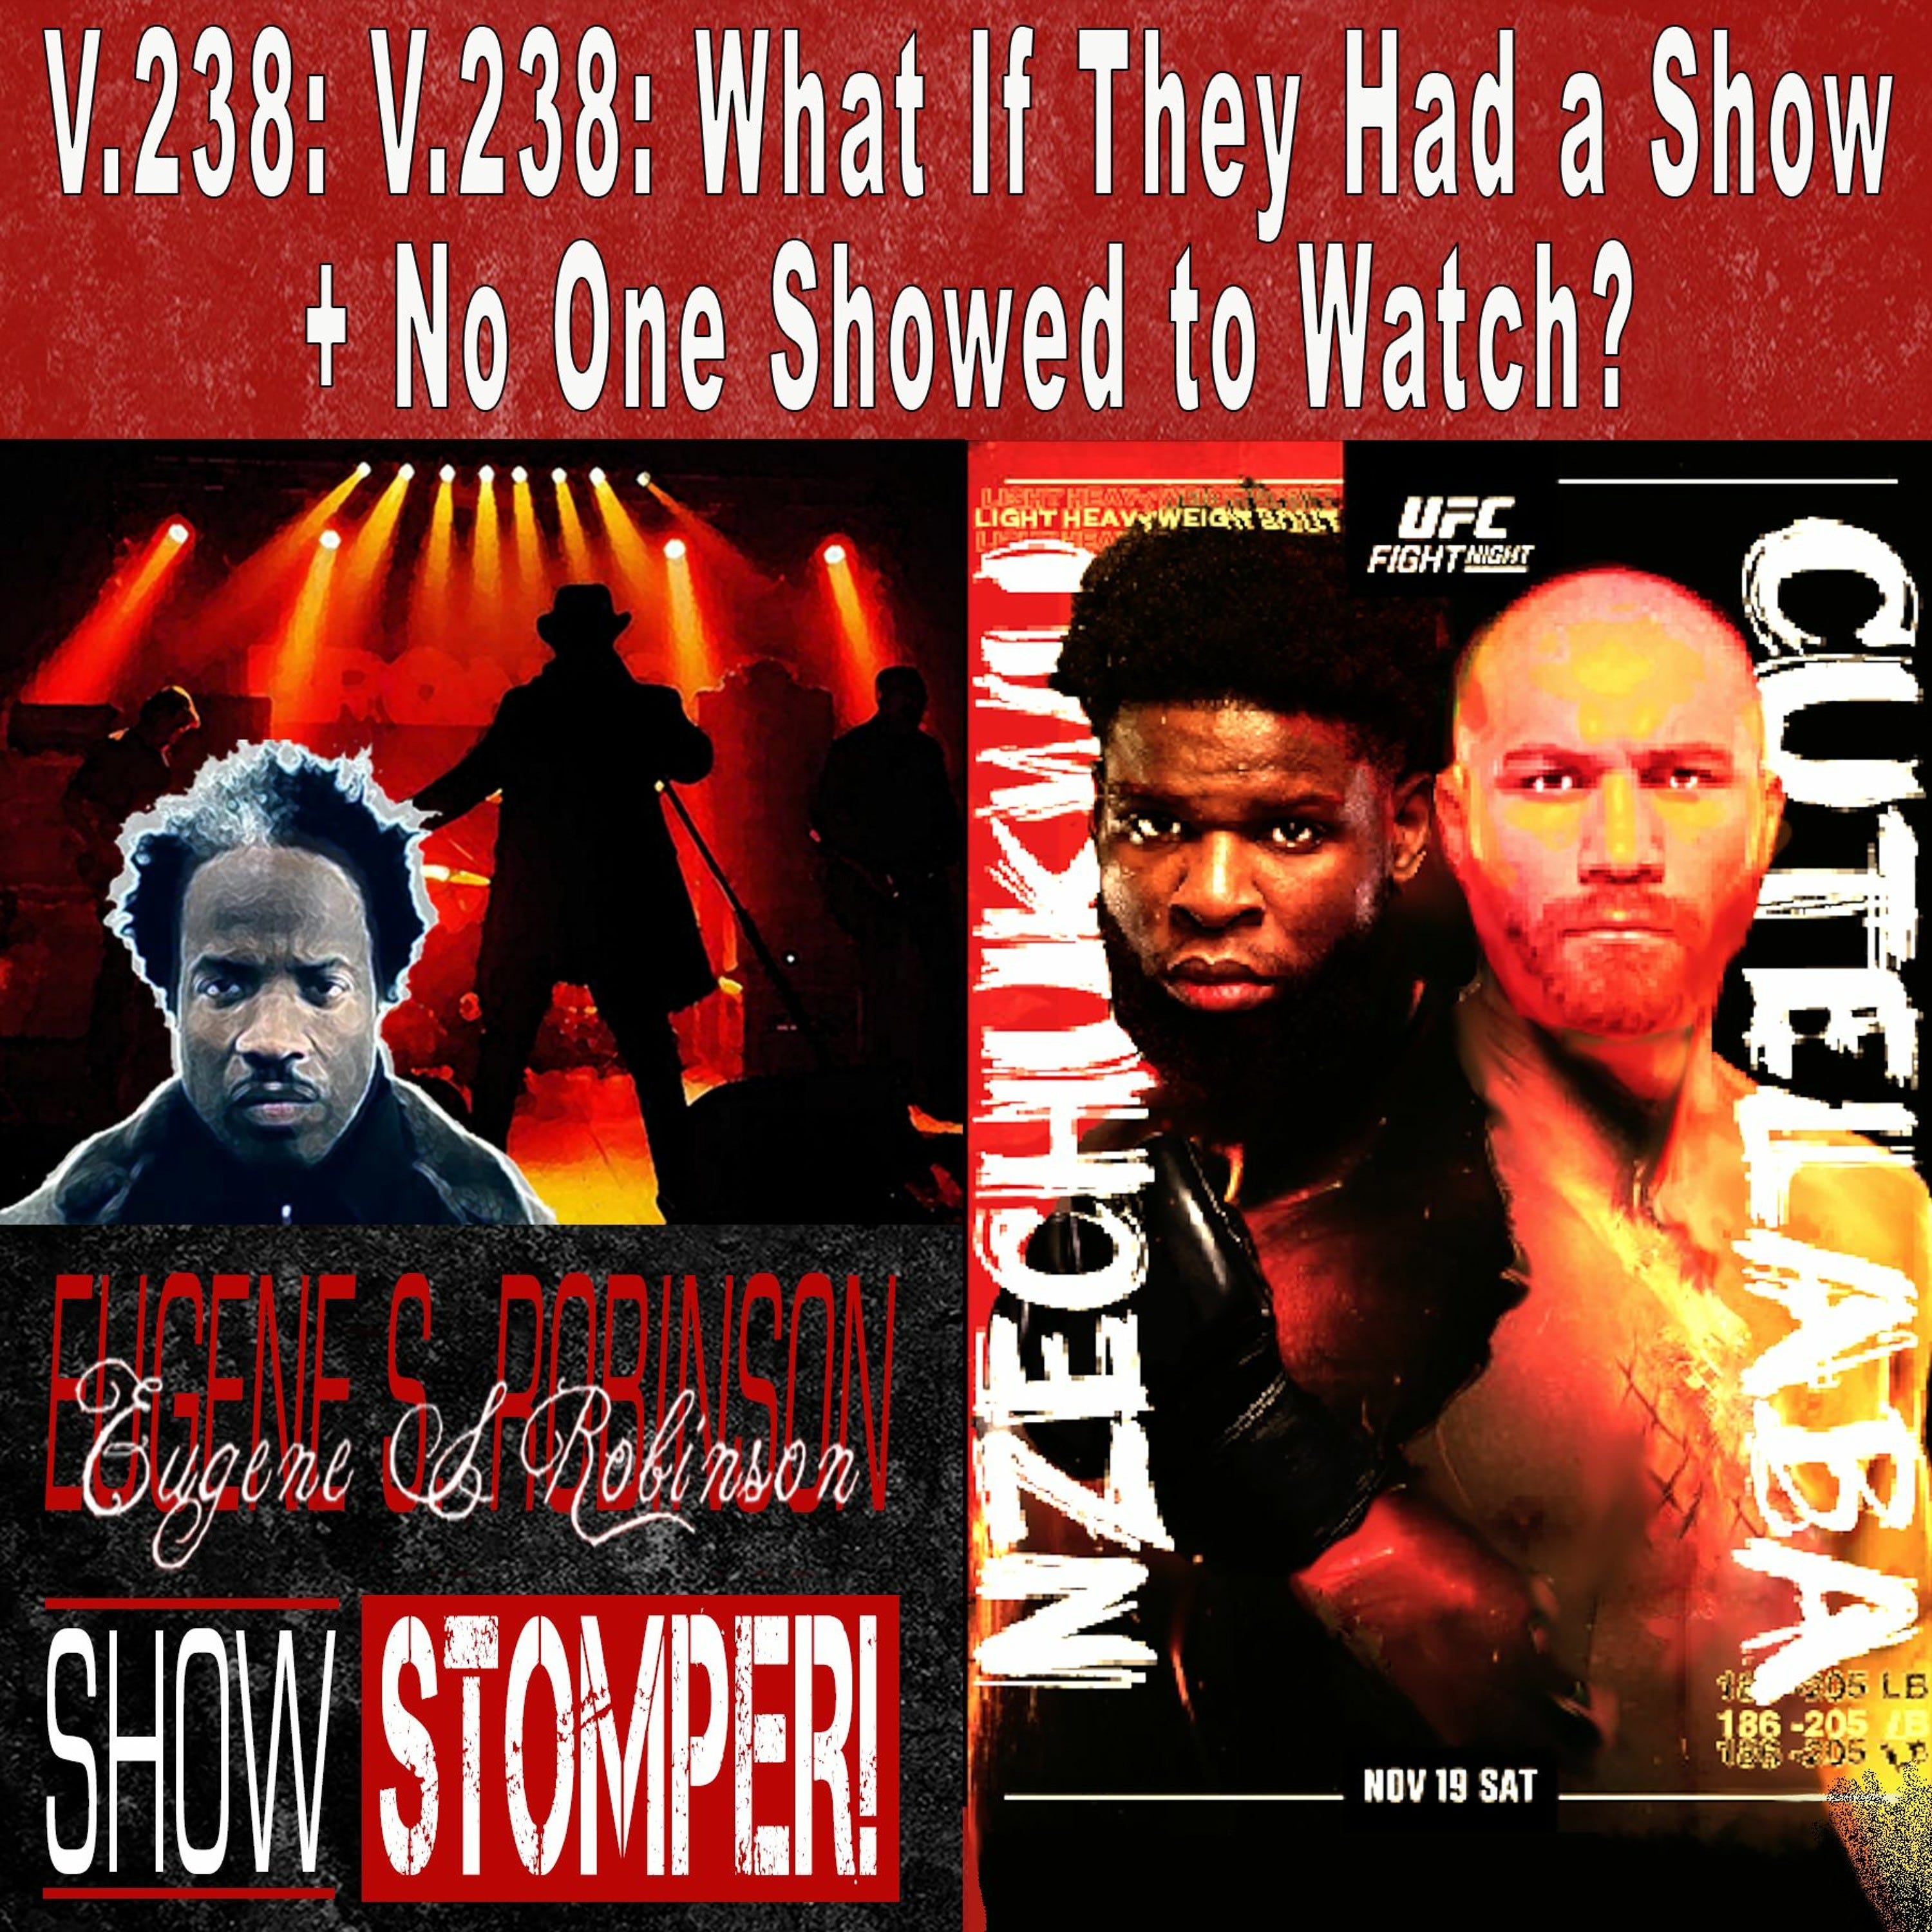 V.238: What If They Had a Show + No One Showed to Watch? On The Eugene S. Robinson Show Stomper!